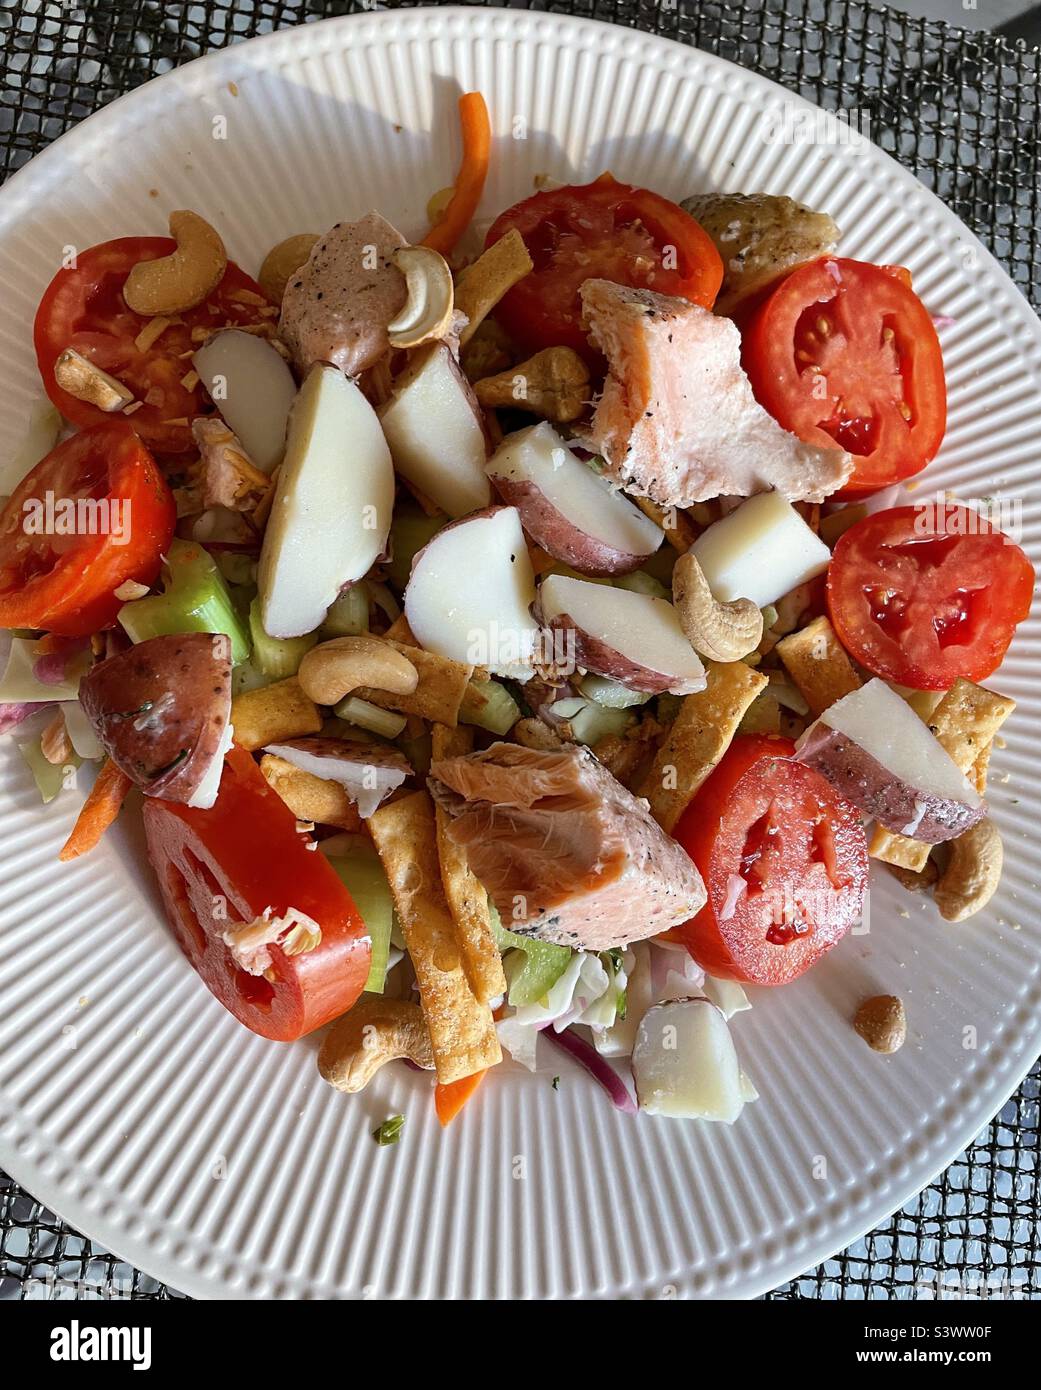 A healthy maincourse salad of broiled salmon chunks and new potatoes over a bed of lettuce with heirloom tomatoes, 2022, USA Stock Photo